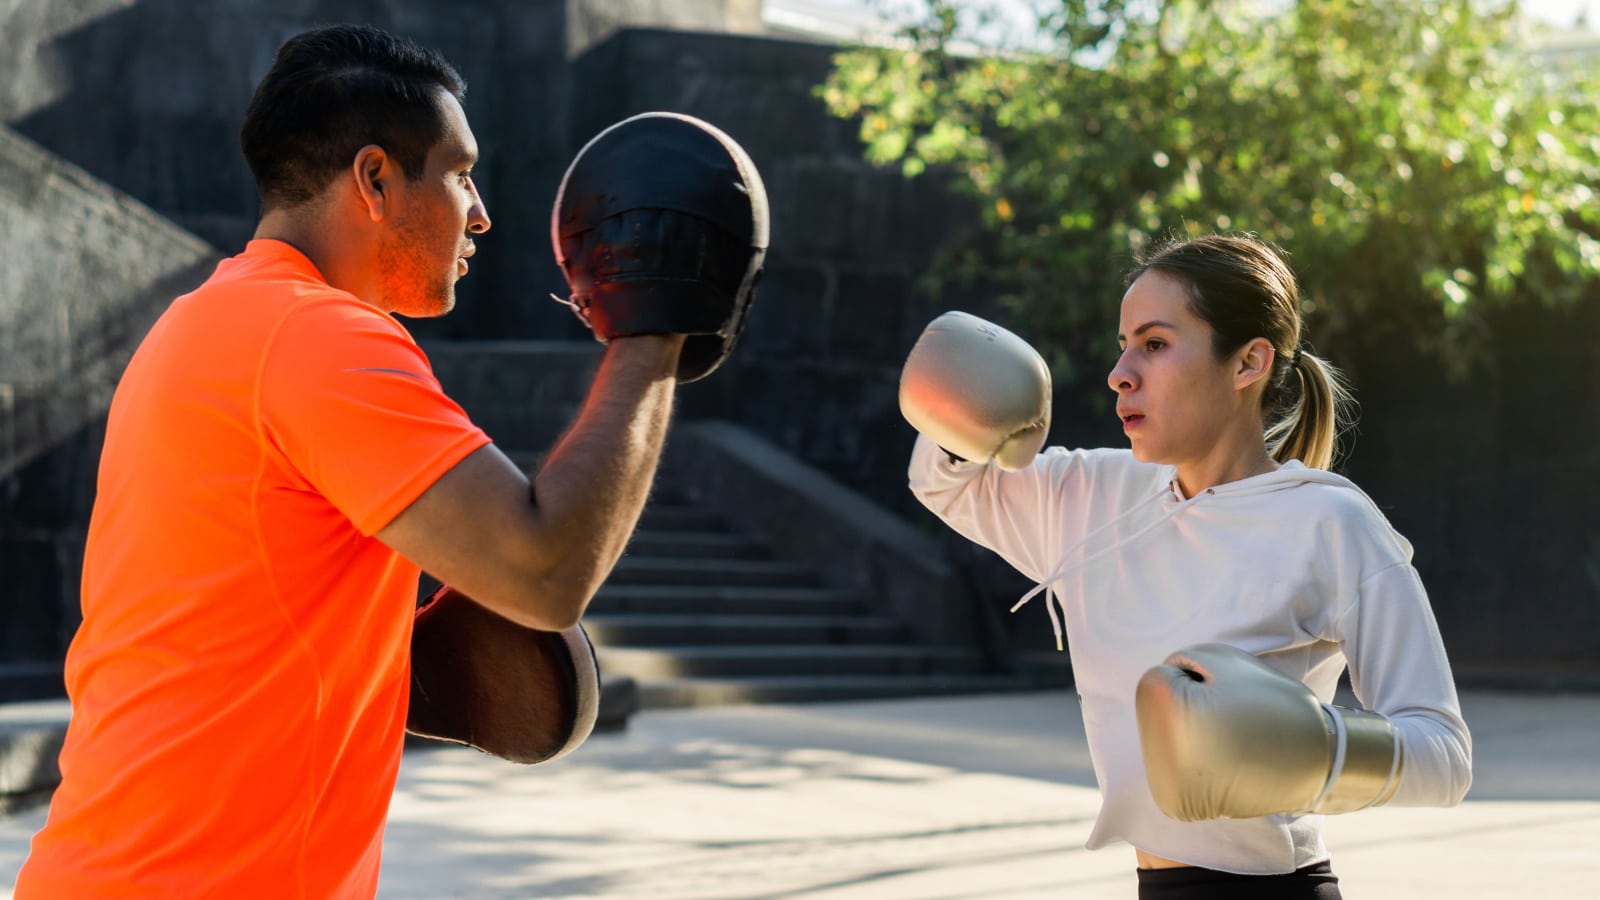 Boxing trainer teaching private lessons to a woman of Latino origin.